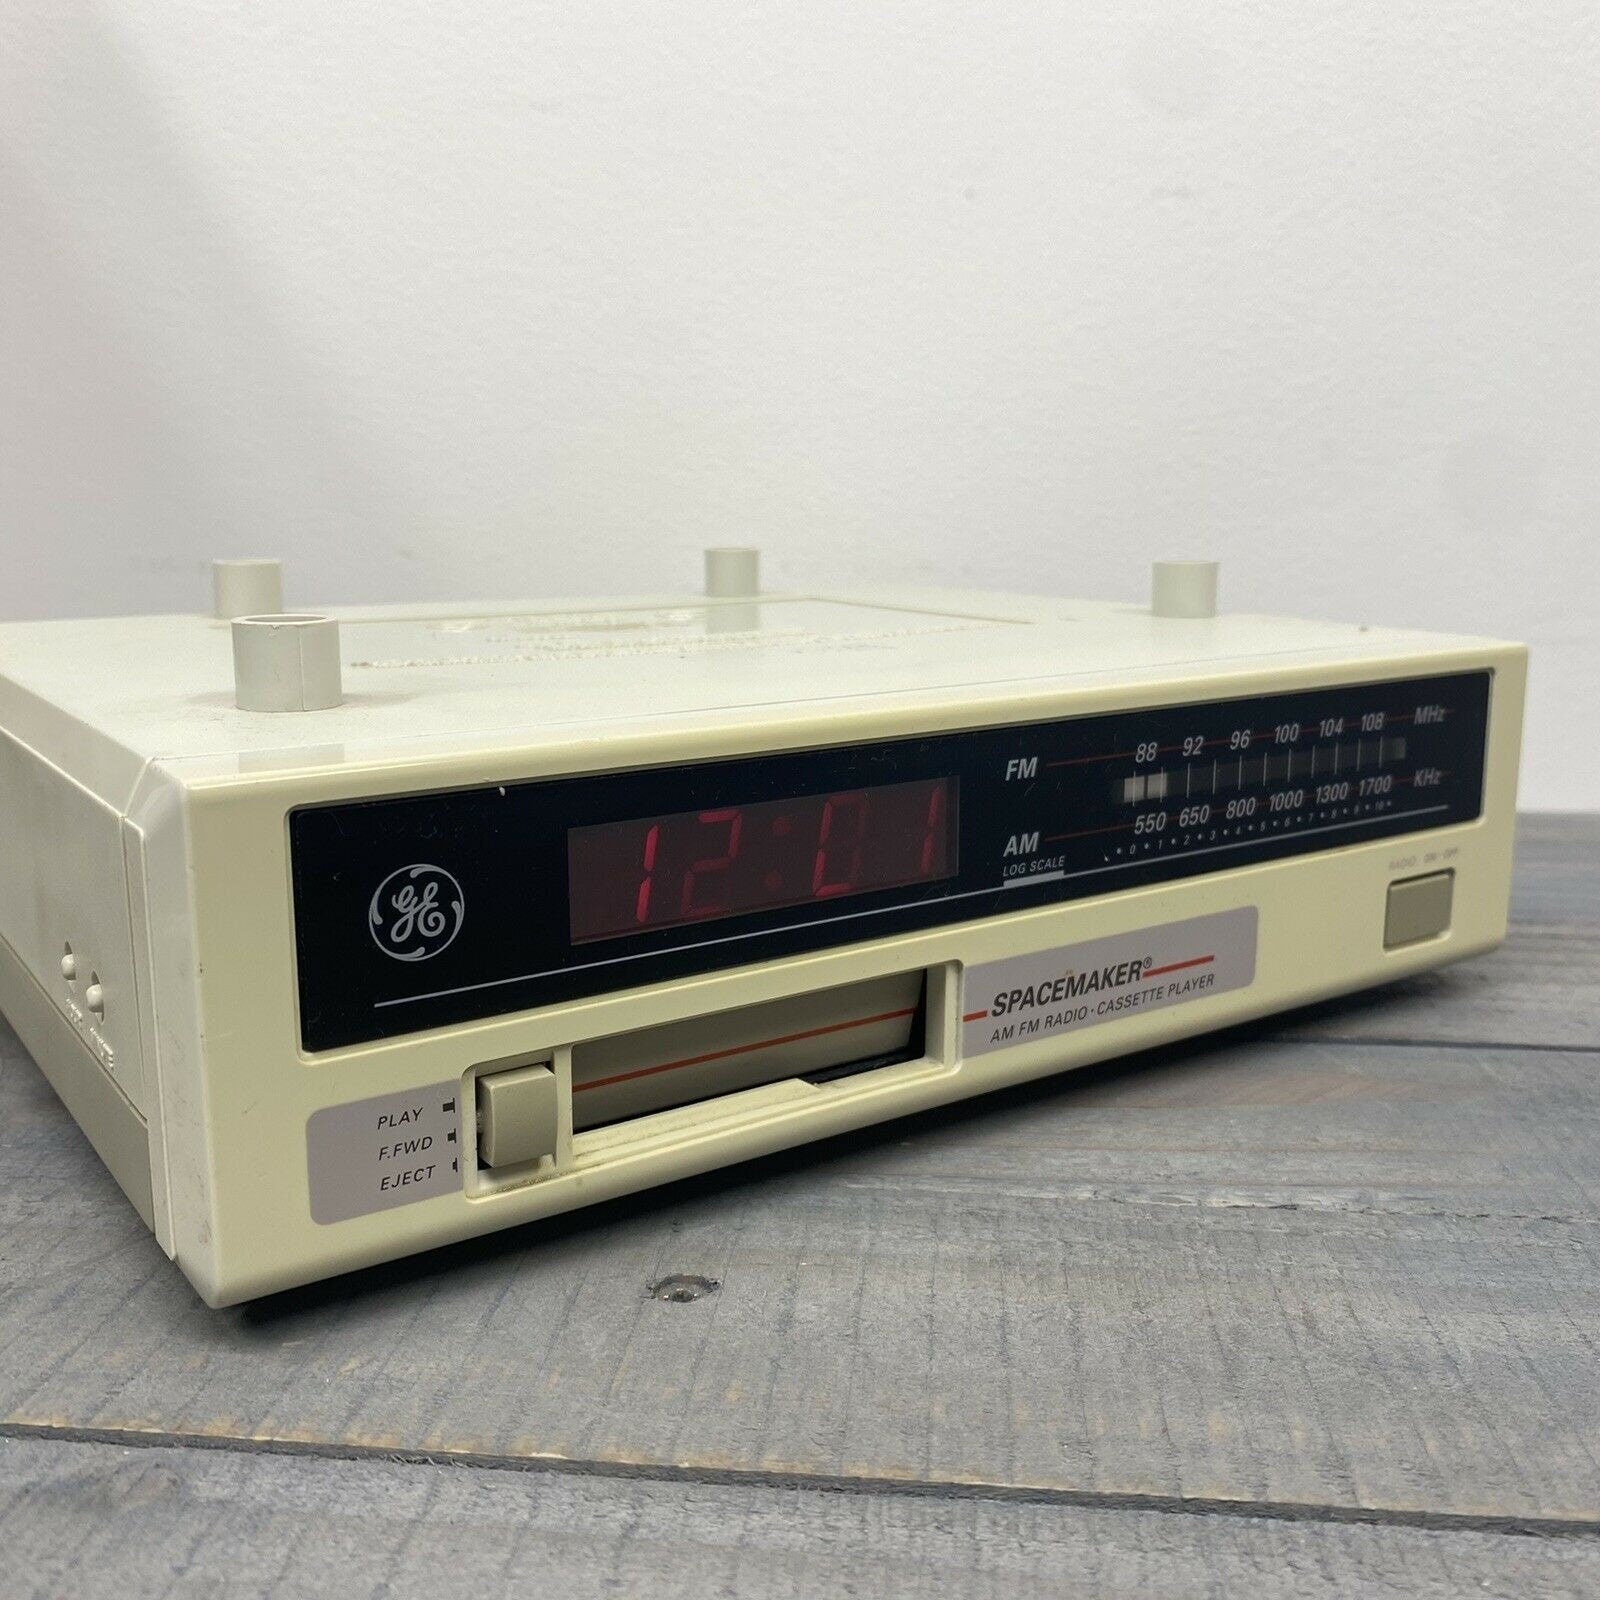 GE Spacemaker AM FM Radio Cassette Player 7-4260A